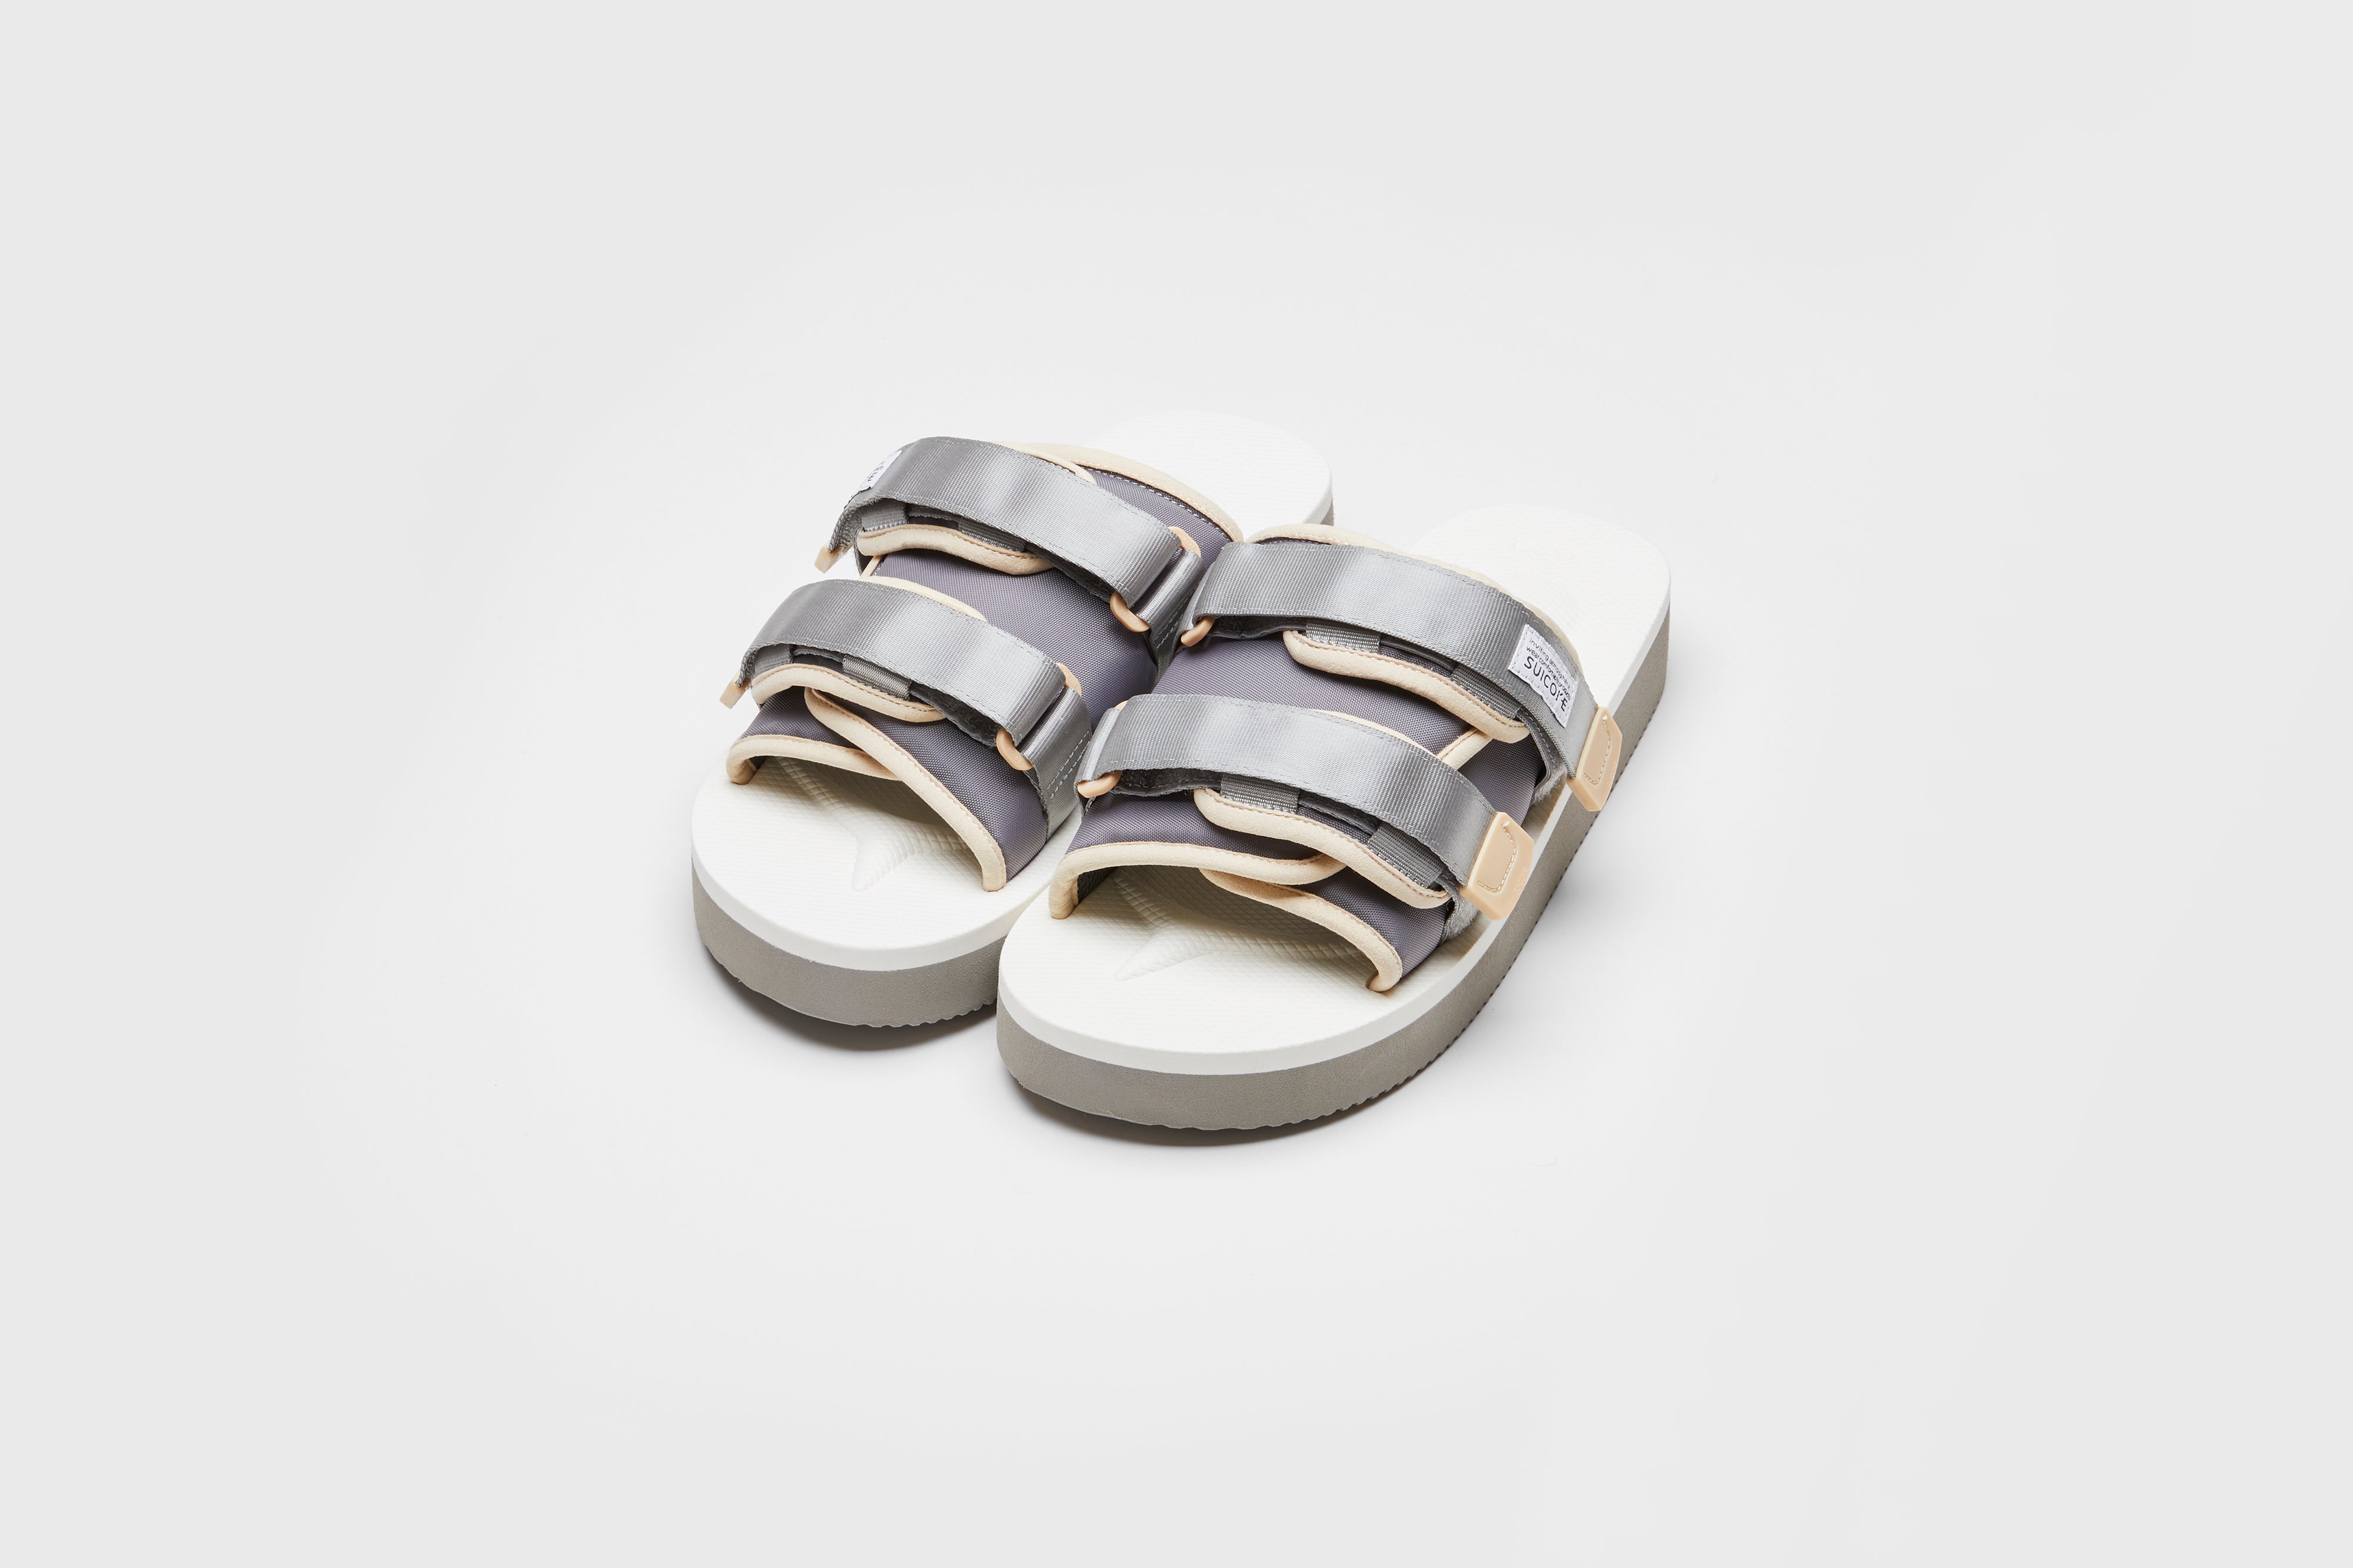 SUICOKE MOTO-PO slides with gray & white nylon upper, gray & white midsole and sole, strap and logo patch. From Spring/Summer 2023 collection on eightywingold Web Store, an official partner of SUICOKE. OG-056PO GRAY X WHITE